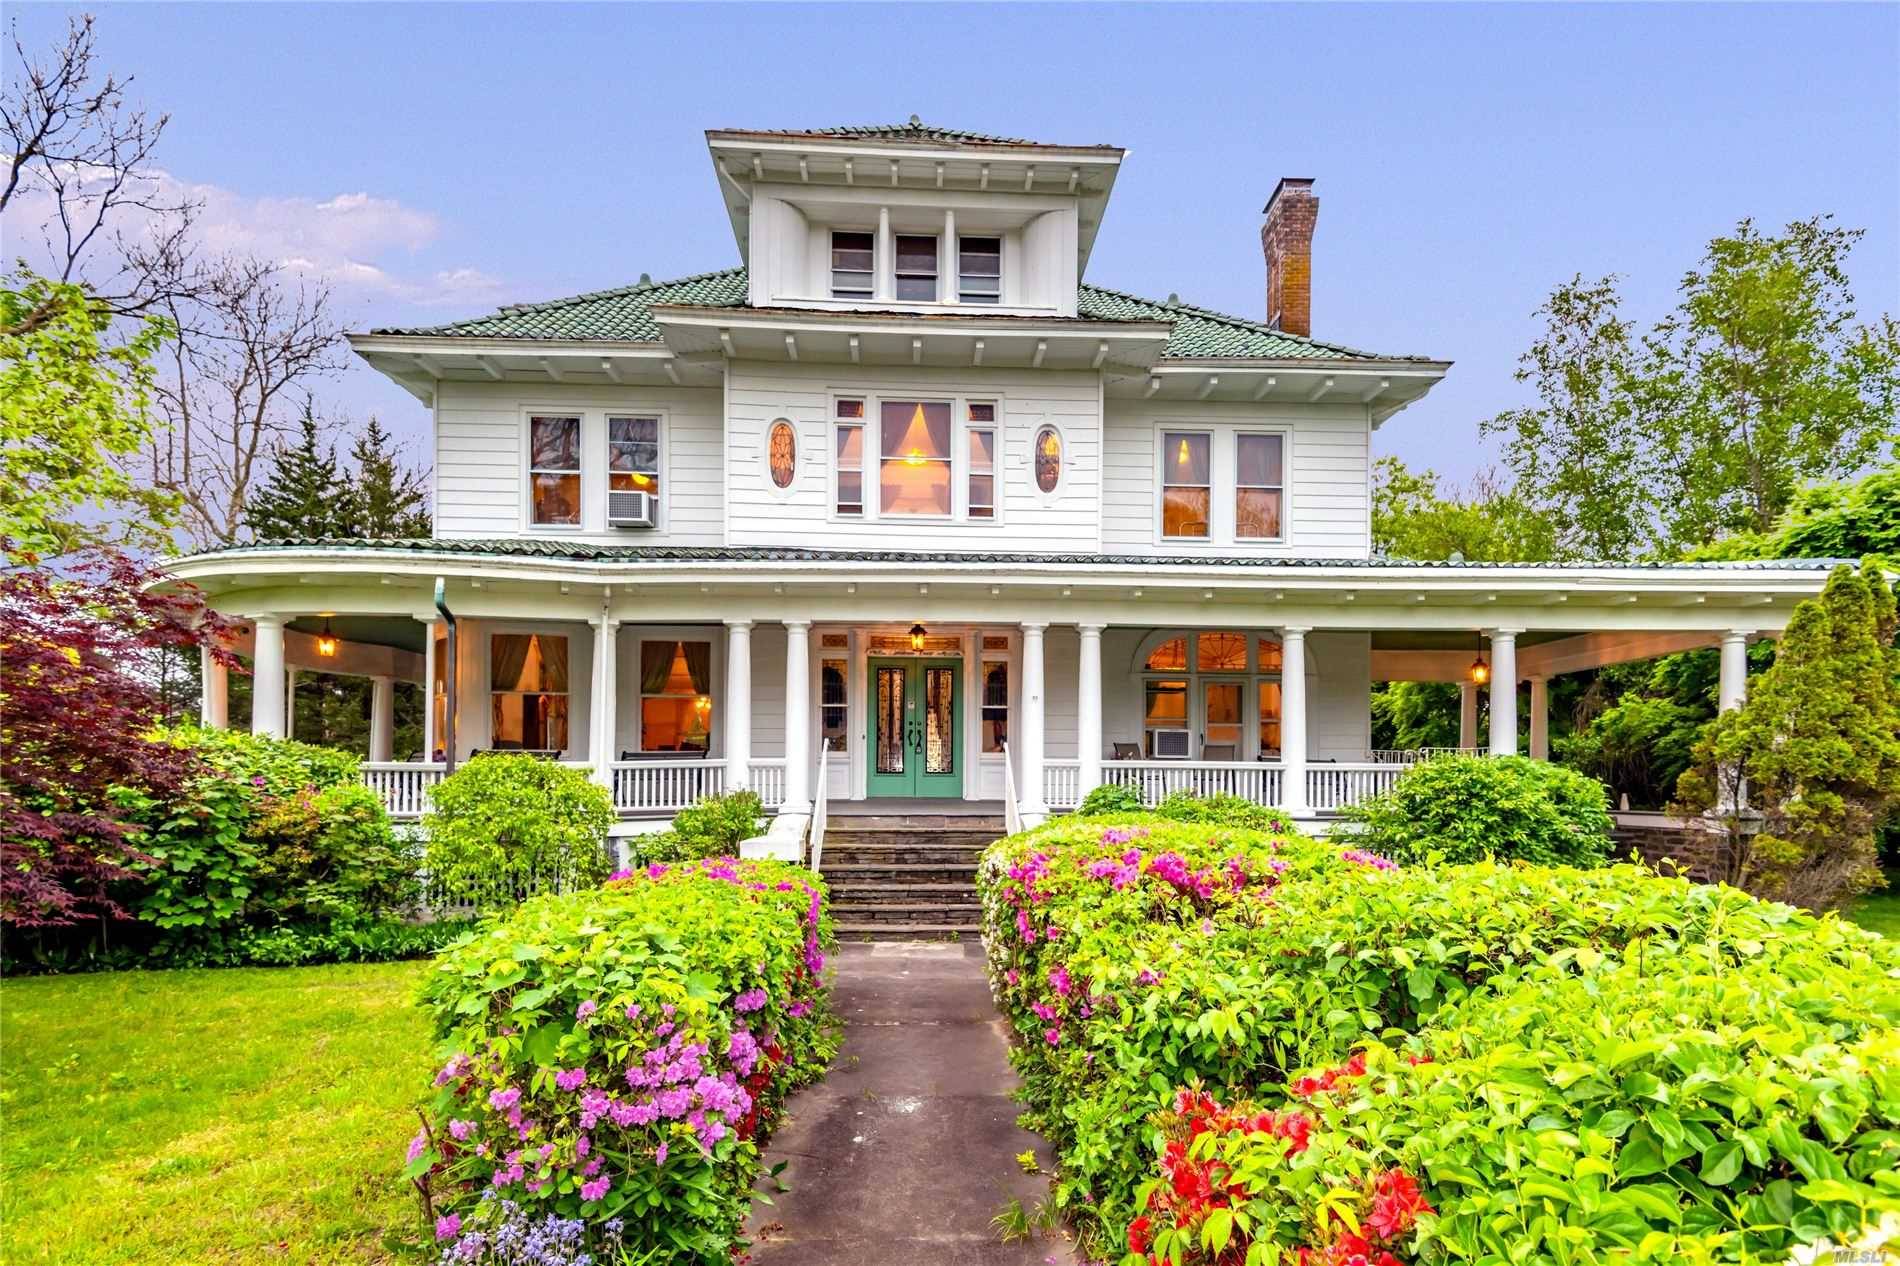 Truly a Once in a Lifetime Opportunity Awaits You at this Iconic Victorian Home In the Historical Town of Jamesport.